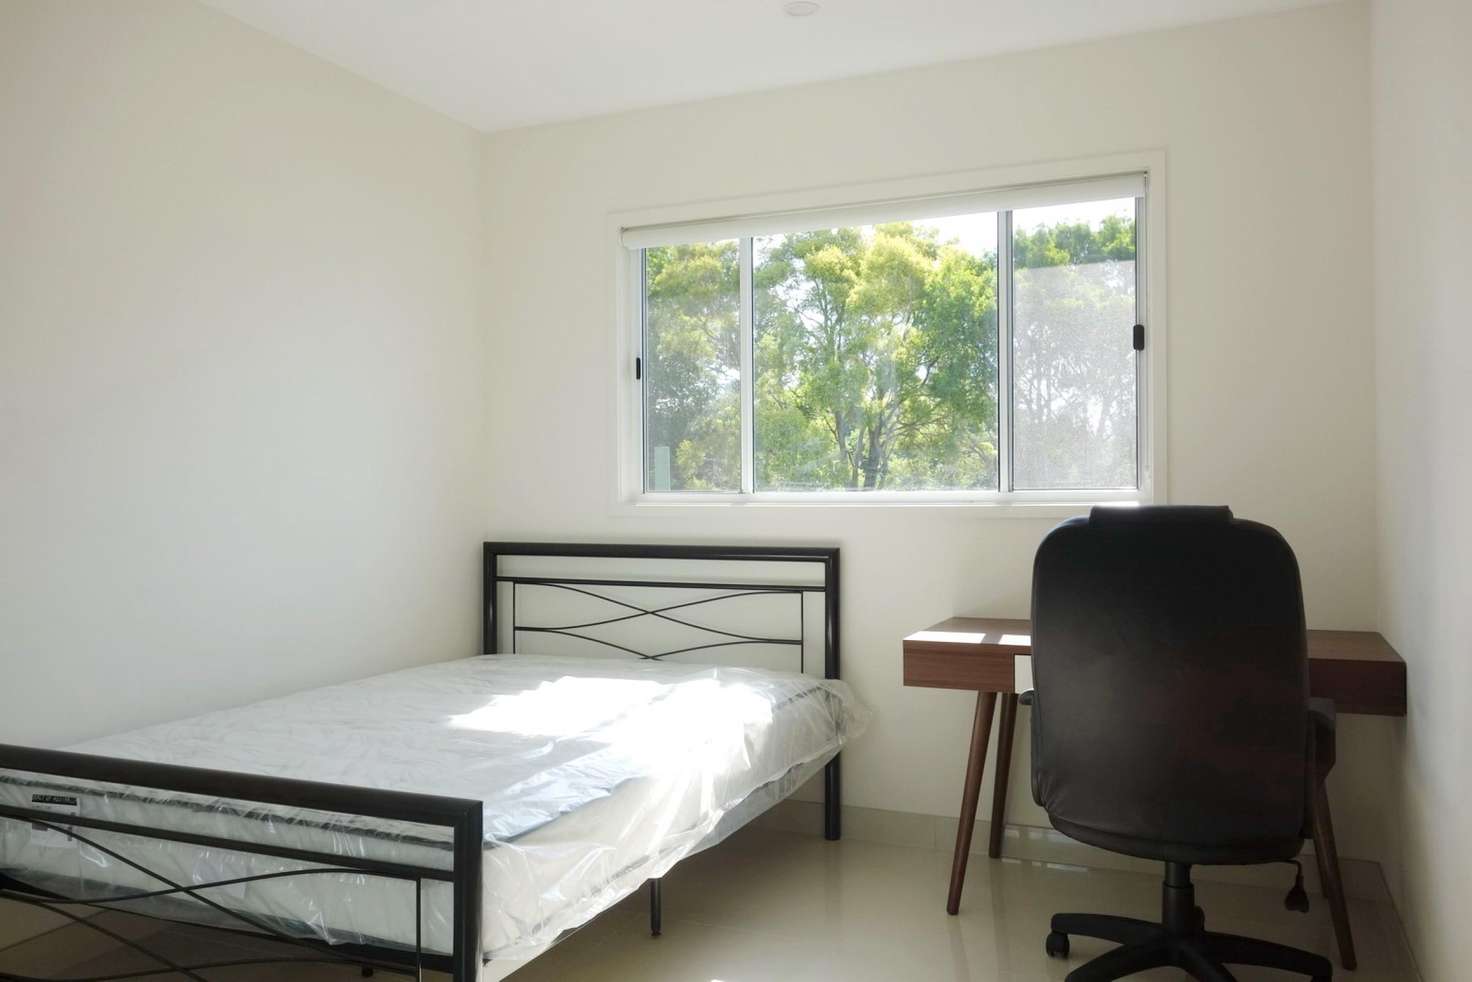 Main view of Homely house listing, 32 Drury street, West End QLD 4101